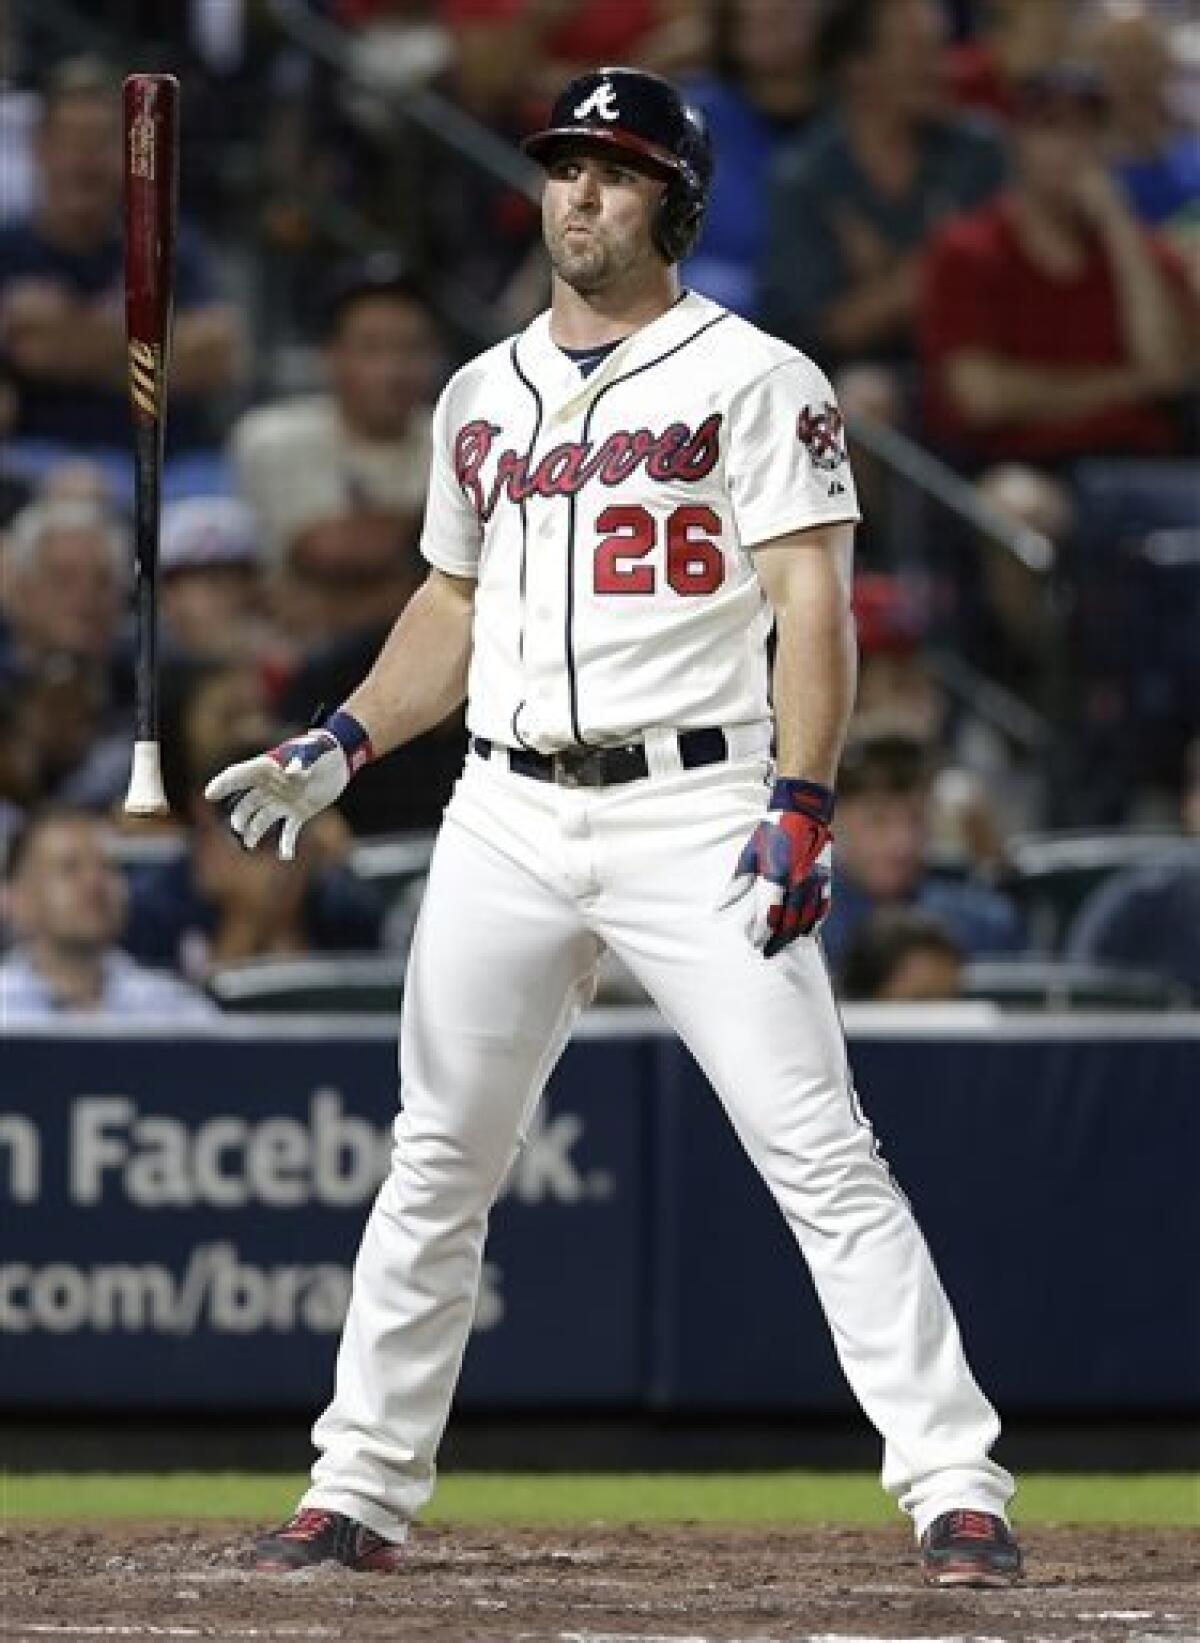 Braves' Uggla goes on DL, to have eye surgery - The San Diego